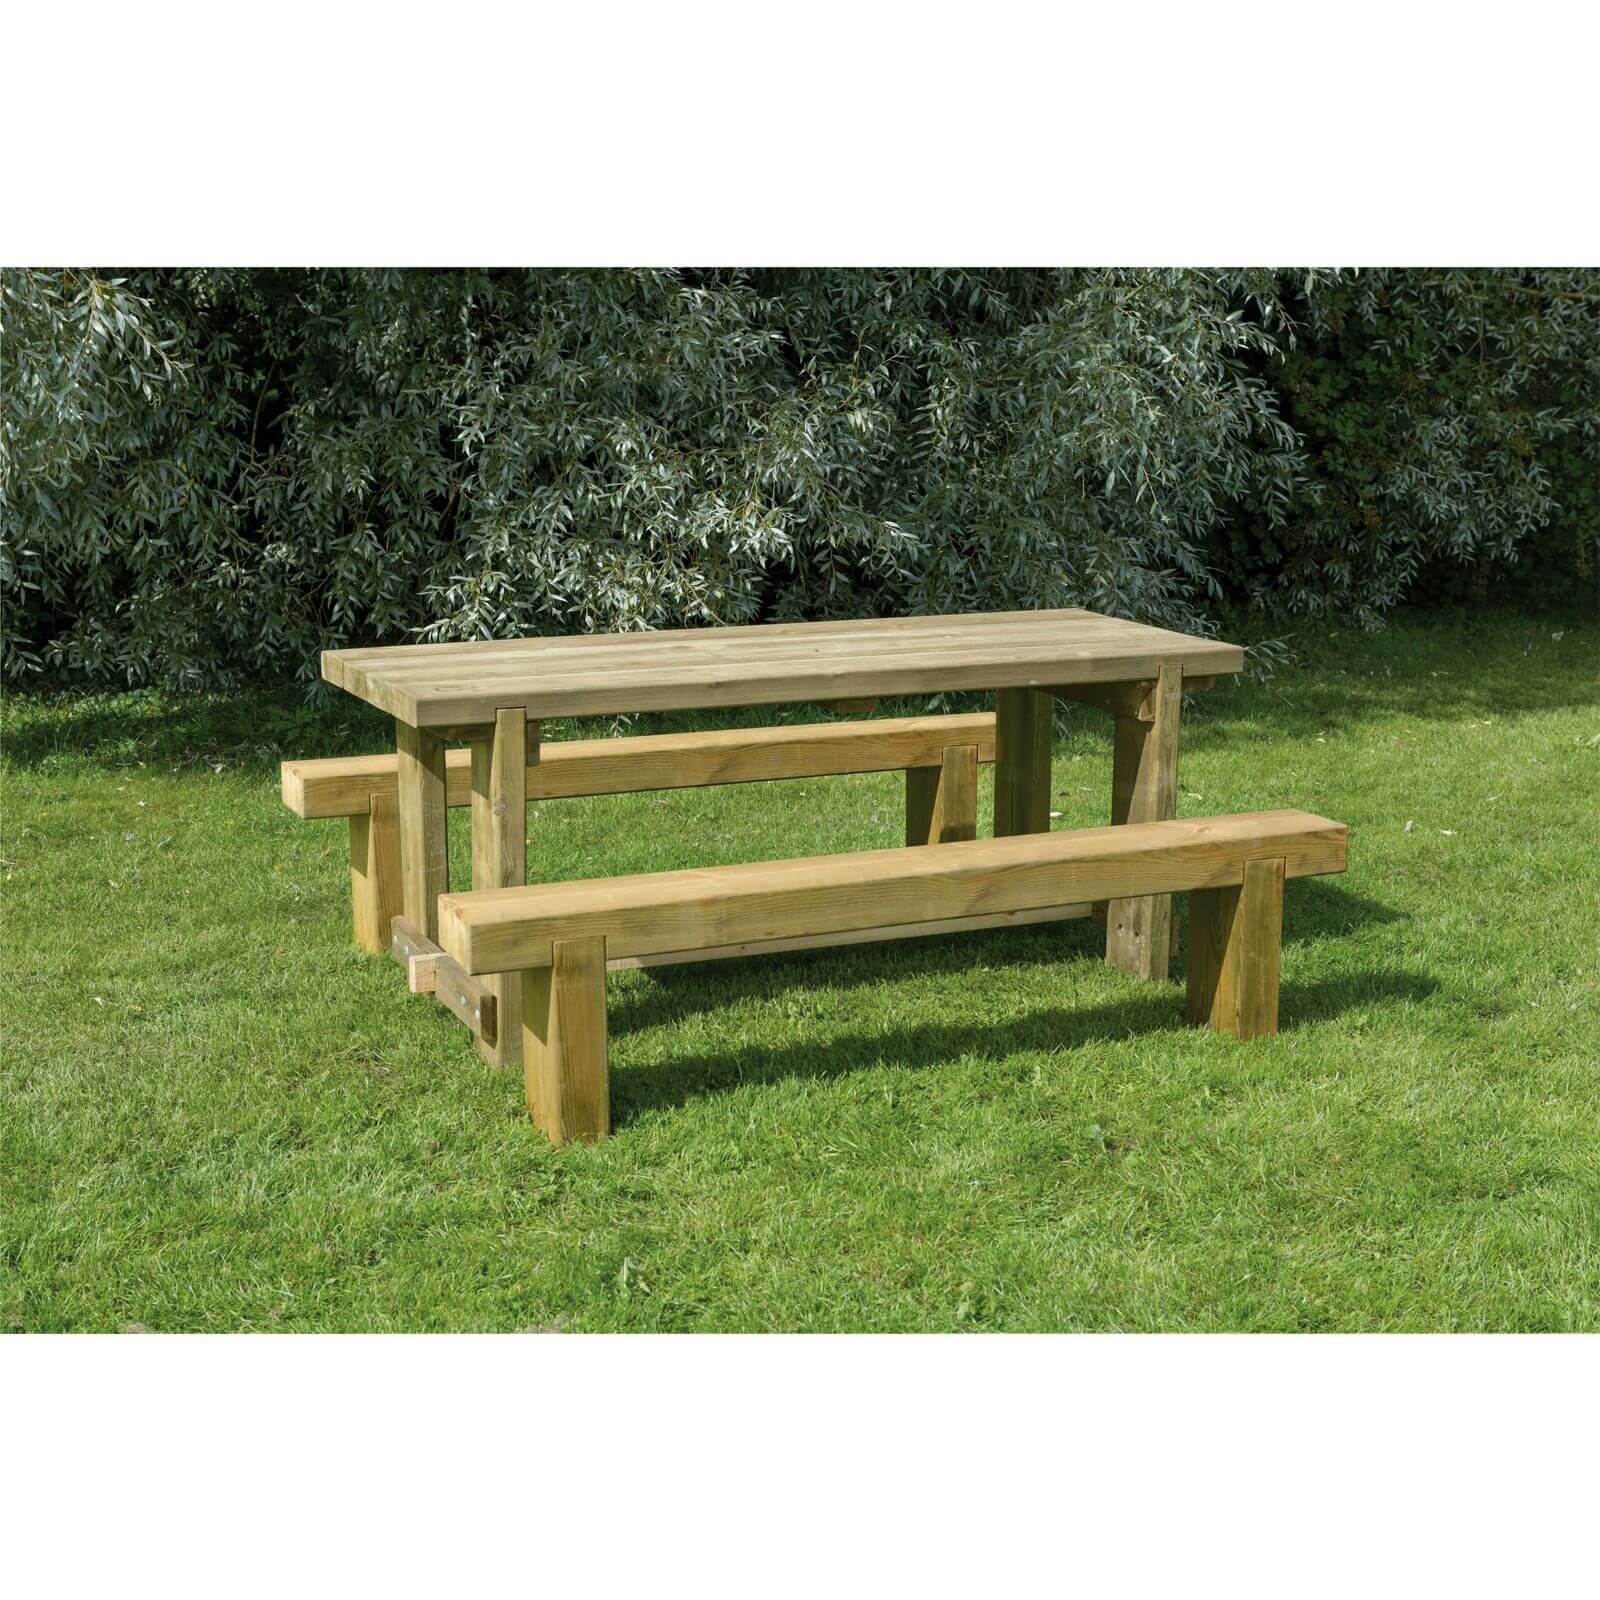 Forest Garden Refectory 1.8m Wooden 6 Seater Picnic Table Sleeper Bench Set